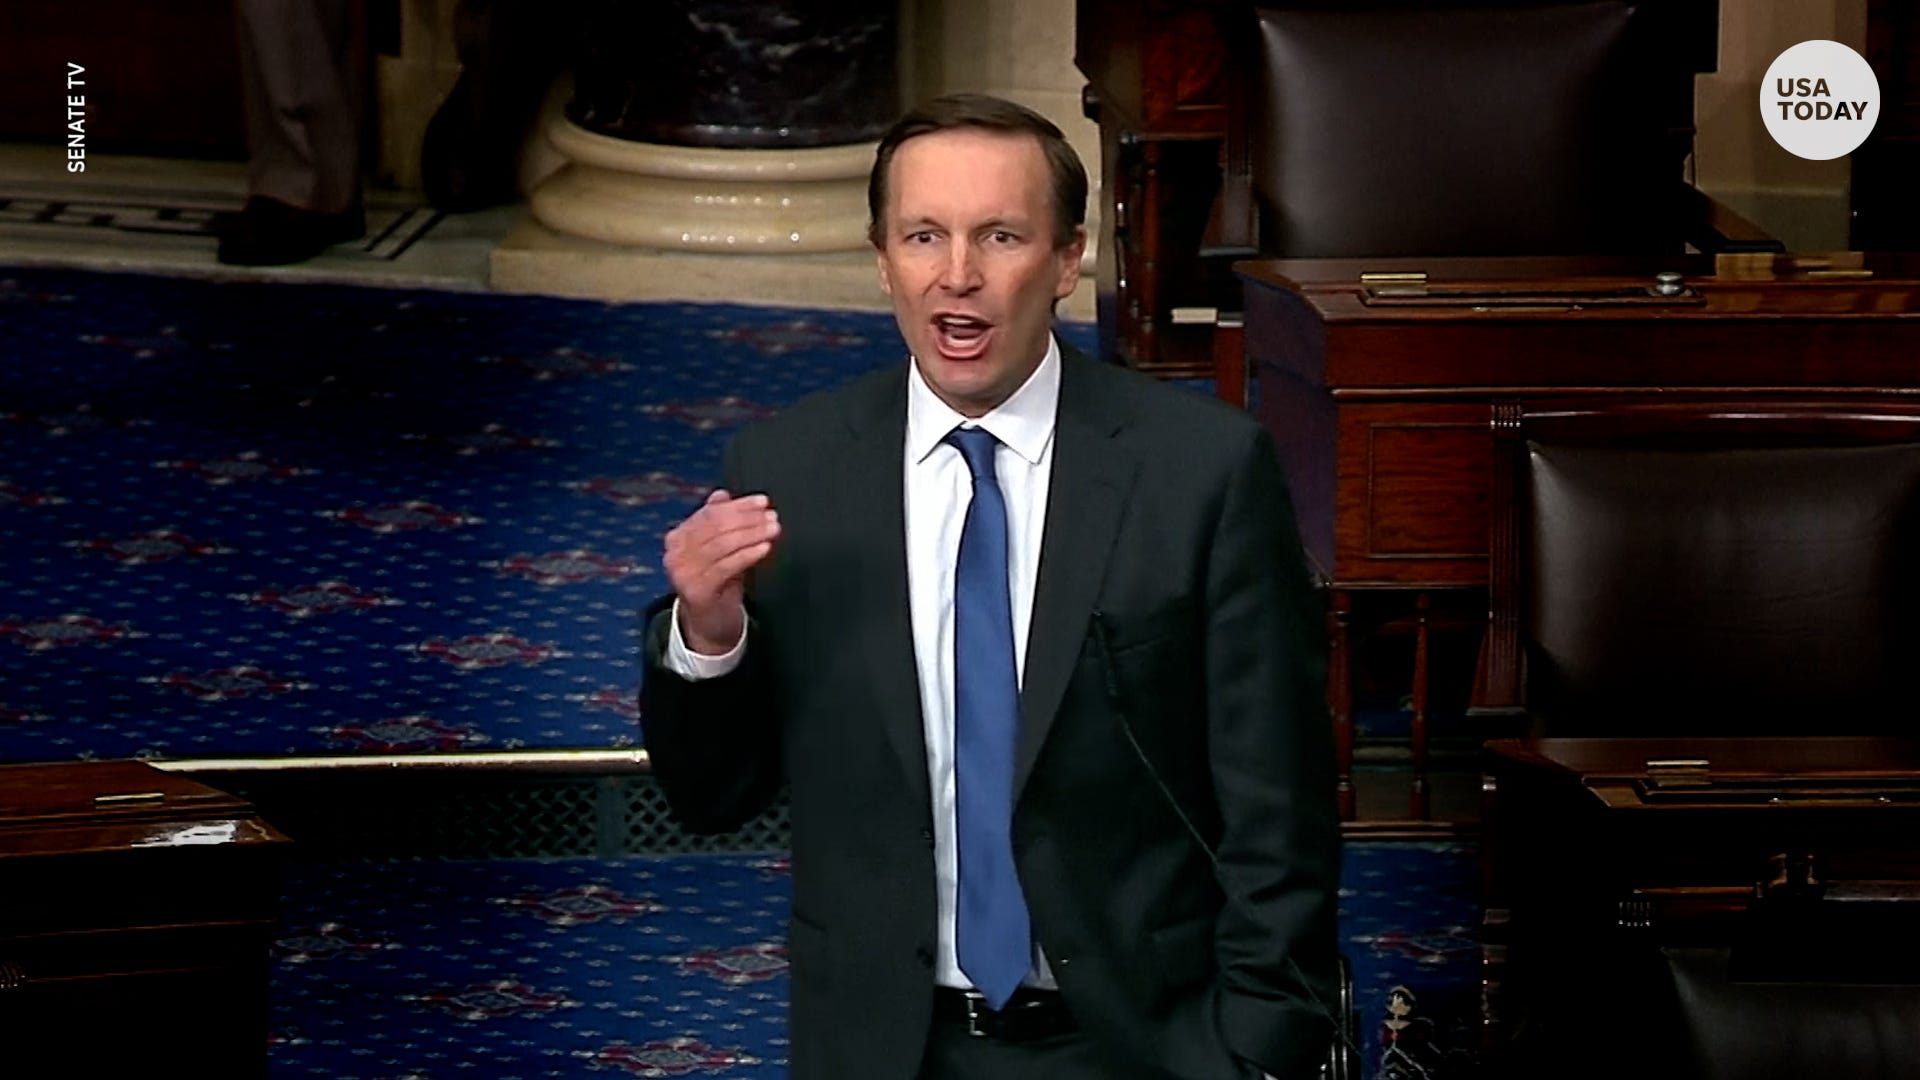 'What are we doing?': Sen. Chris Murphy gives emotional speech on Texas elementary school shooting